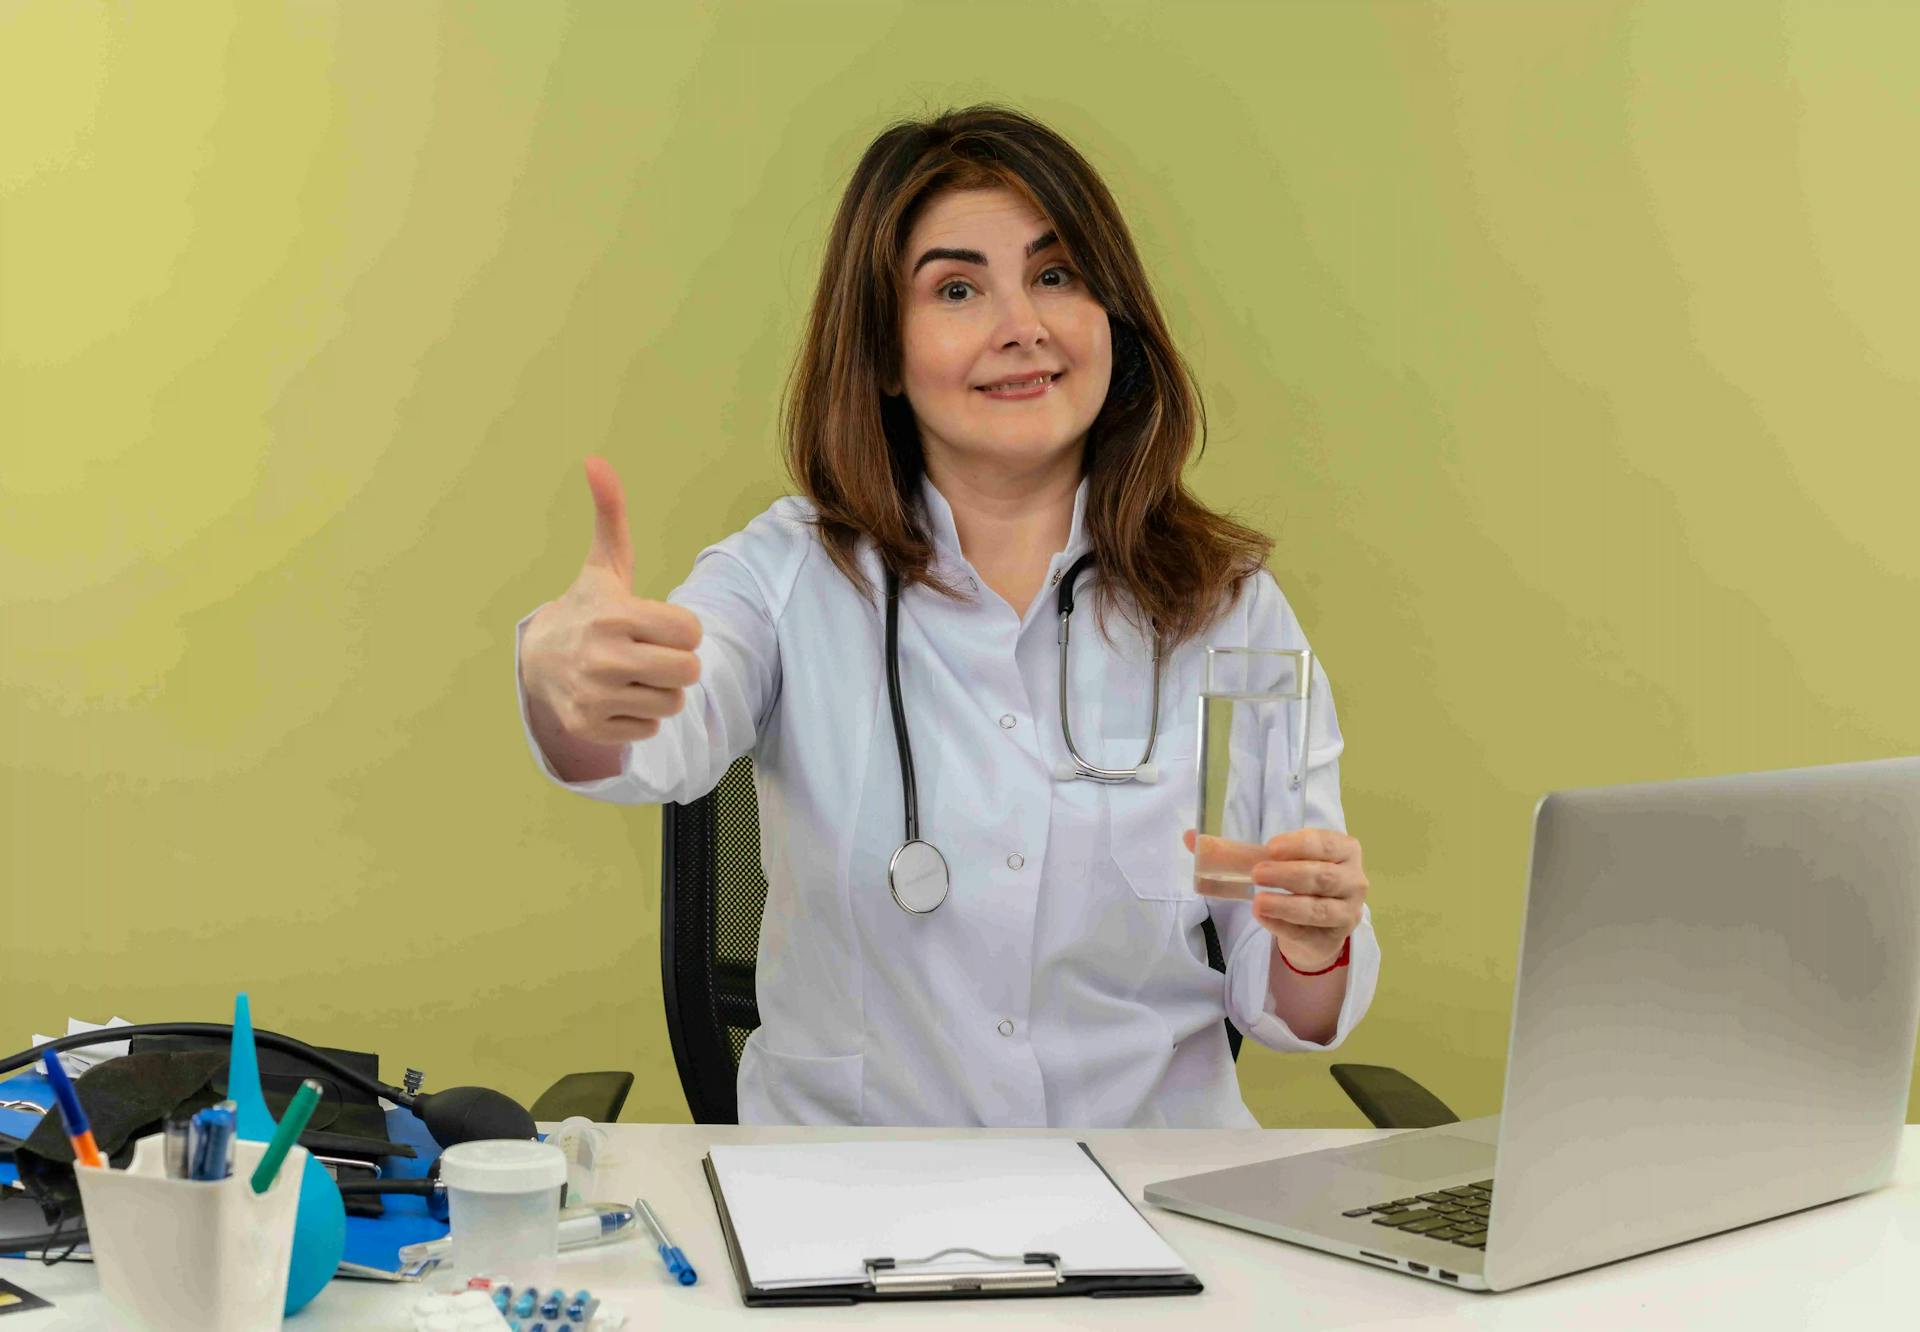 https://strapiassetsprod.s3.amazonaws.com/pleased_middle_aged_female_doctor_wearing_medical_robe_with_stethoscope_sitting_desk_work_laptop_with_medical_tools_holding_glass_water_her_thumb_up_green_wall_with_copy_space_11zon_7917fa8cb6.webp